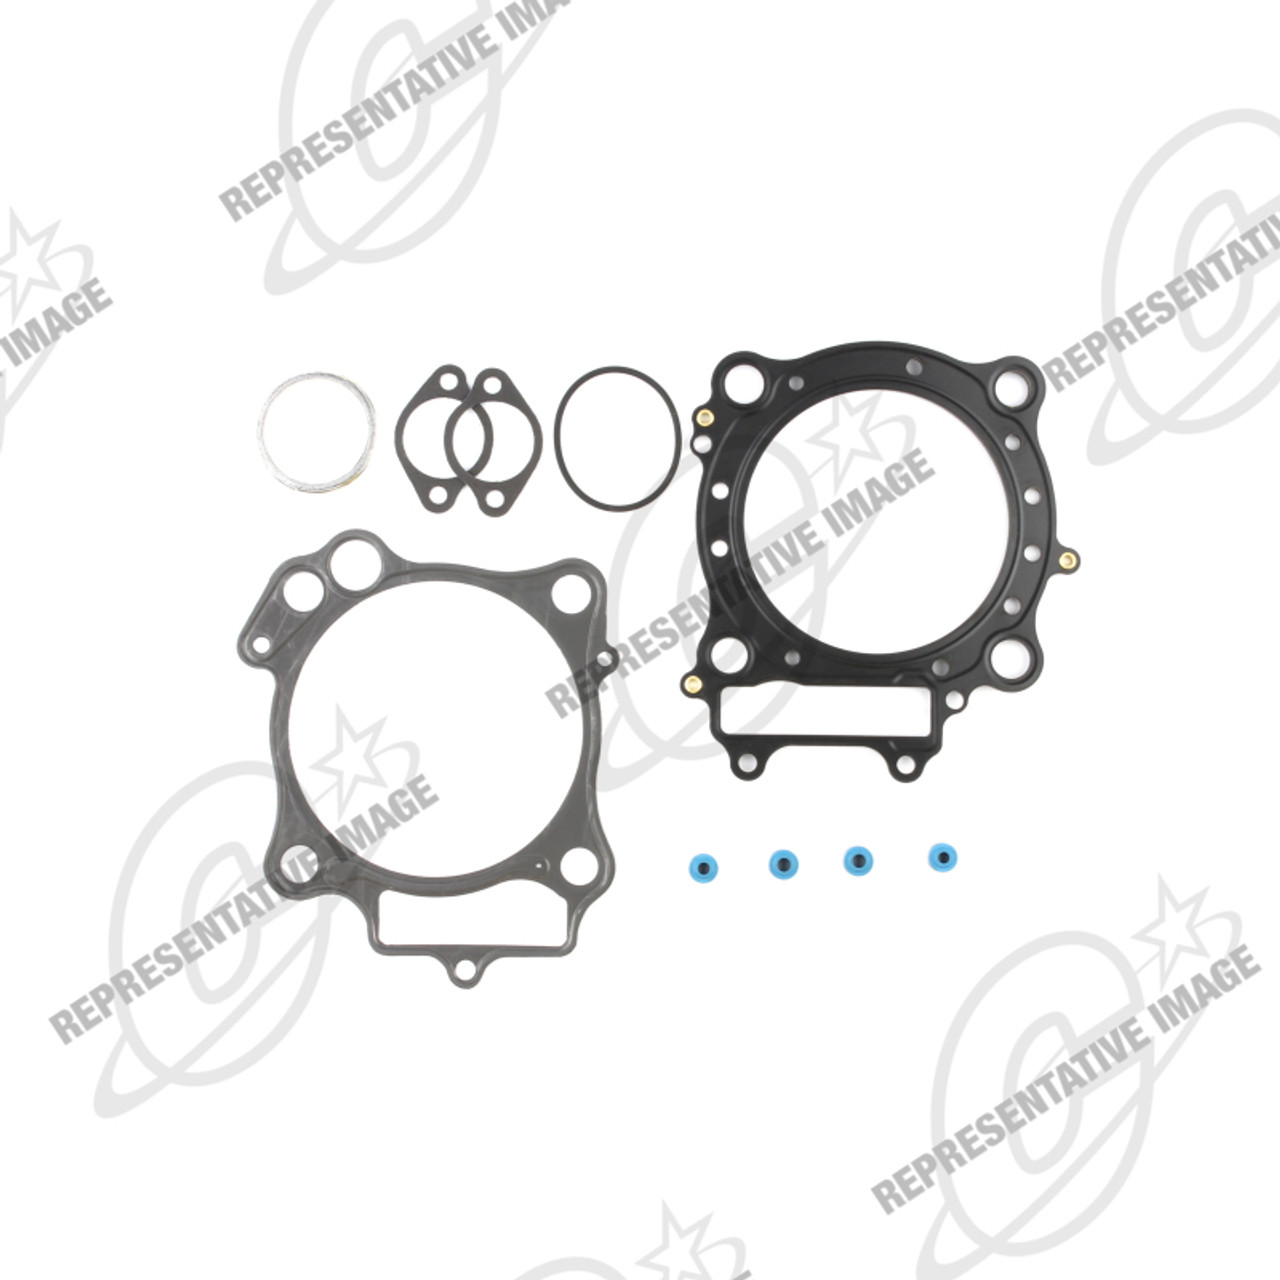 Cometic Harley-Davidson Milwaukee 8 3.937in Bore .040 Head Gasket/.014 Base Gasket - C10164-HB-040 Photo - Primary